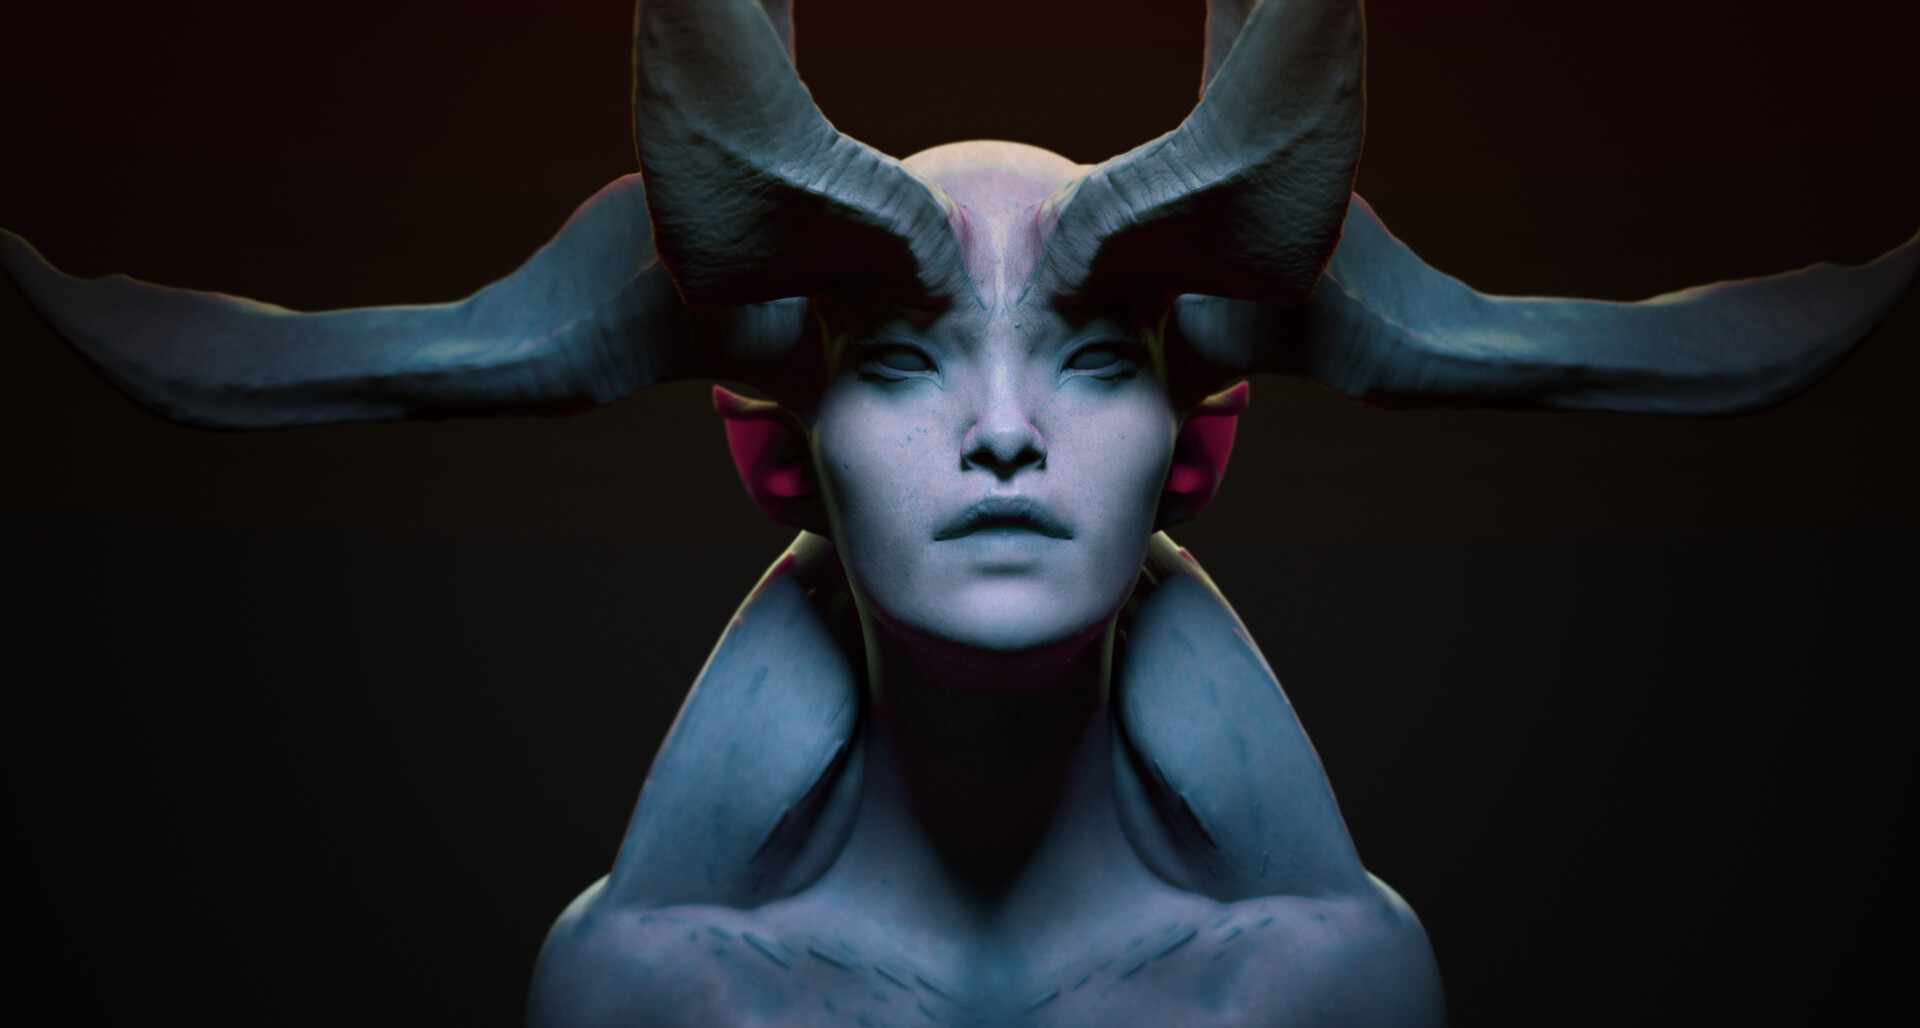 copy and paste zbrush model